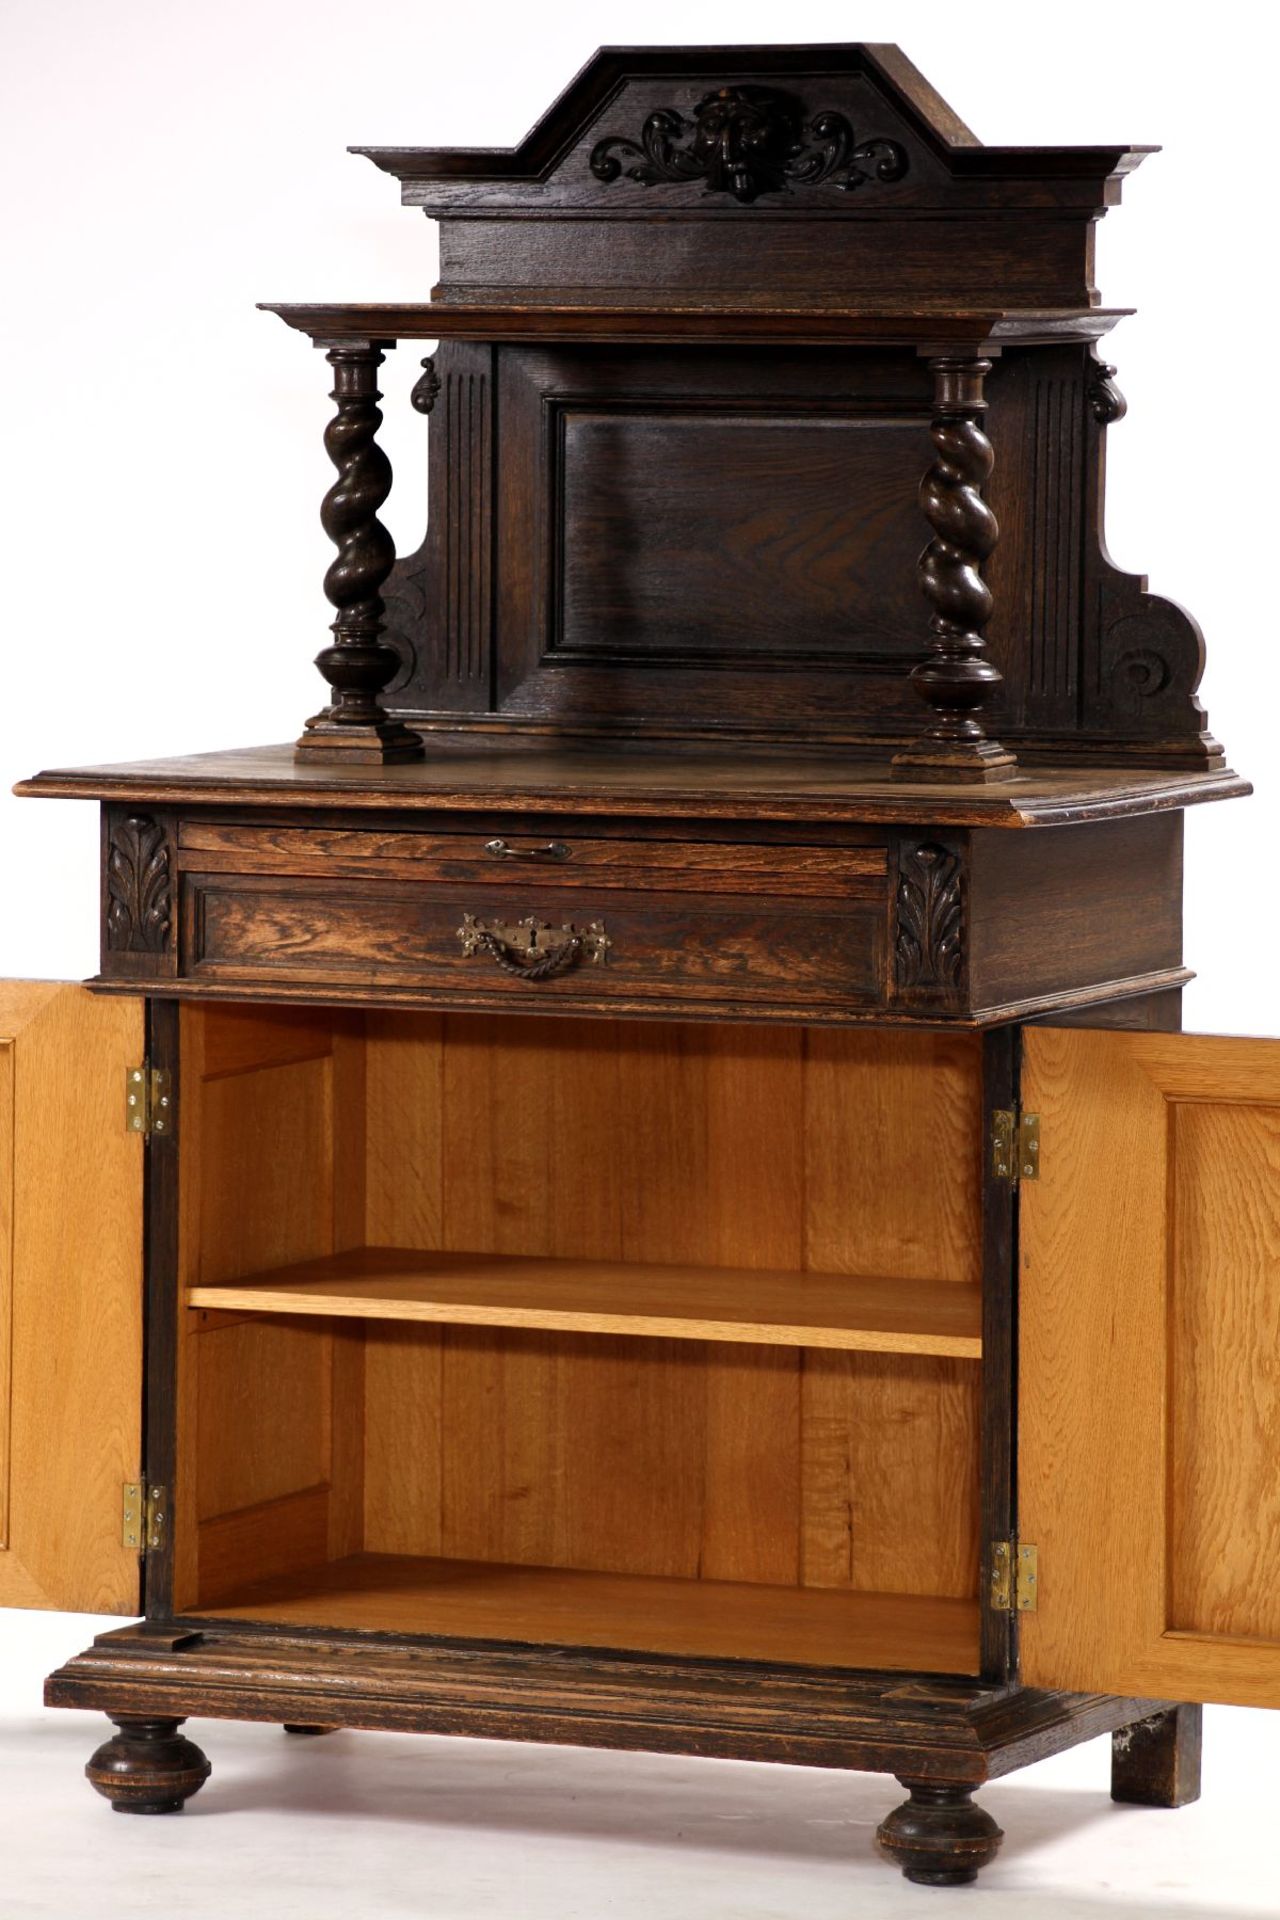 Kredenz, German, around 1890, so-called Wilhelminian style, solid oak and partly veneered, stained - Image 2 of 4